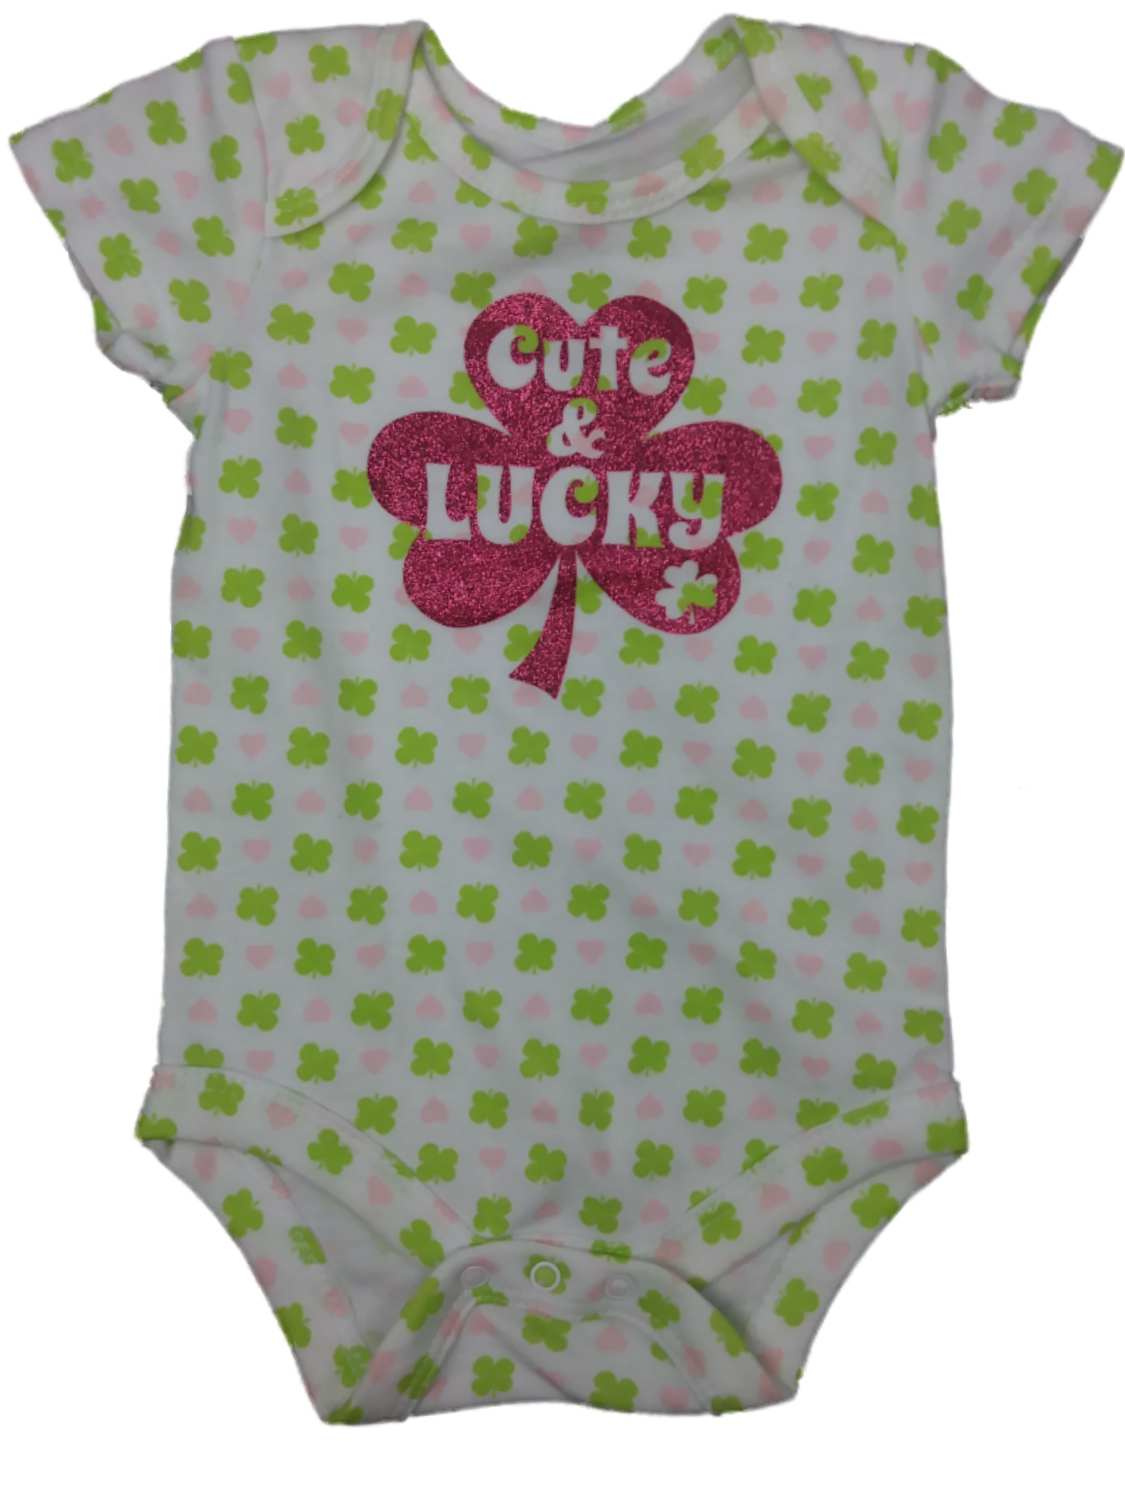 Infant St Patricks Cute & Lucky Glitter Single Outfit Clover Baby Bodysuit - image 1 of 1